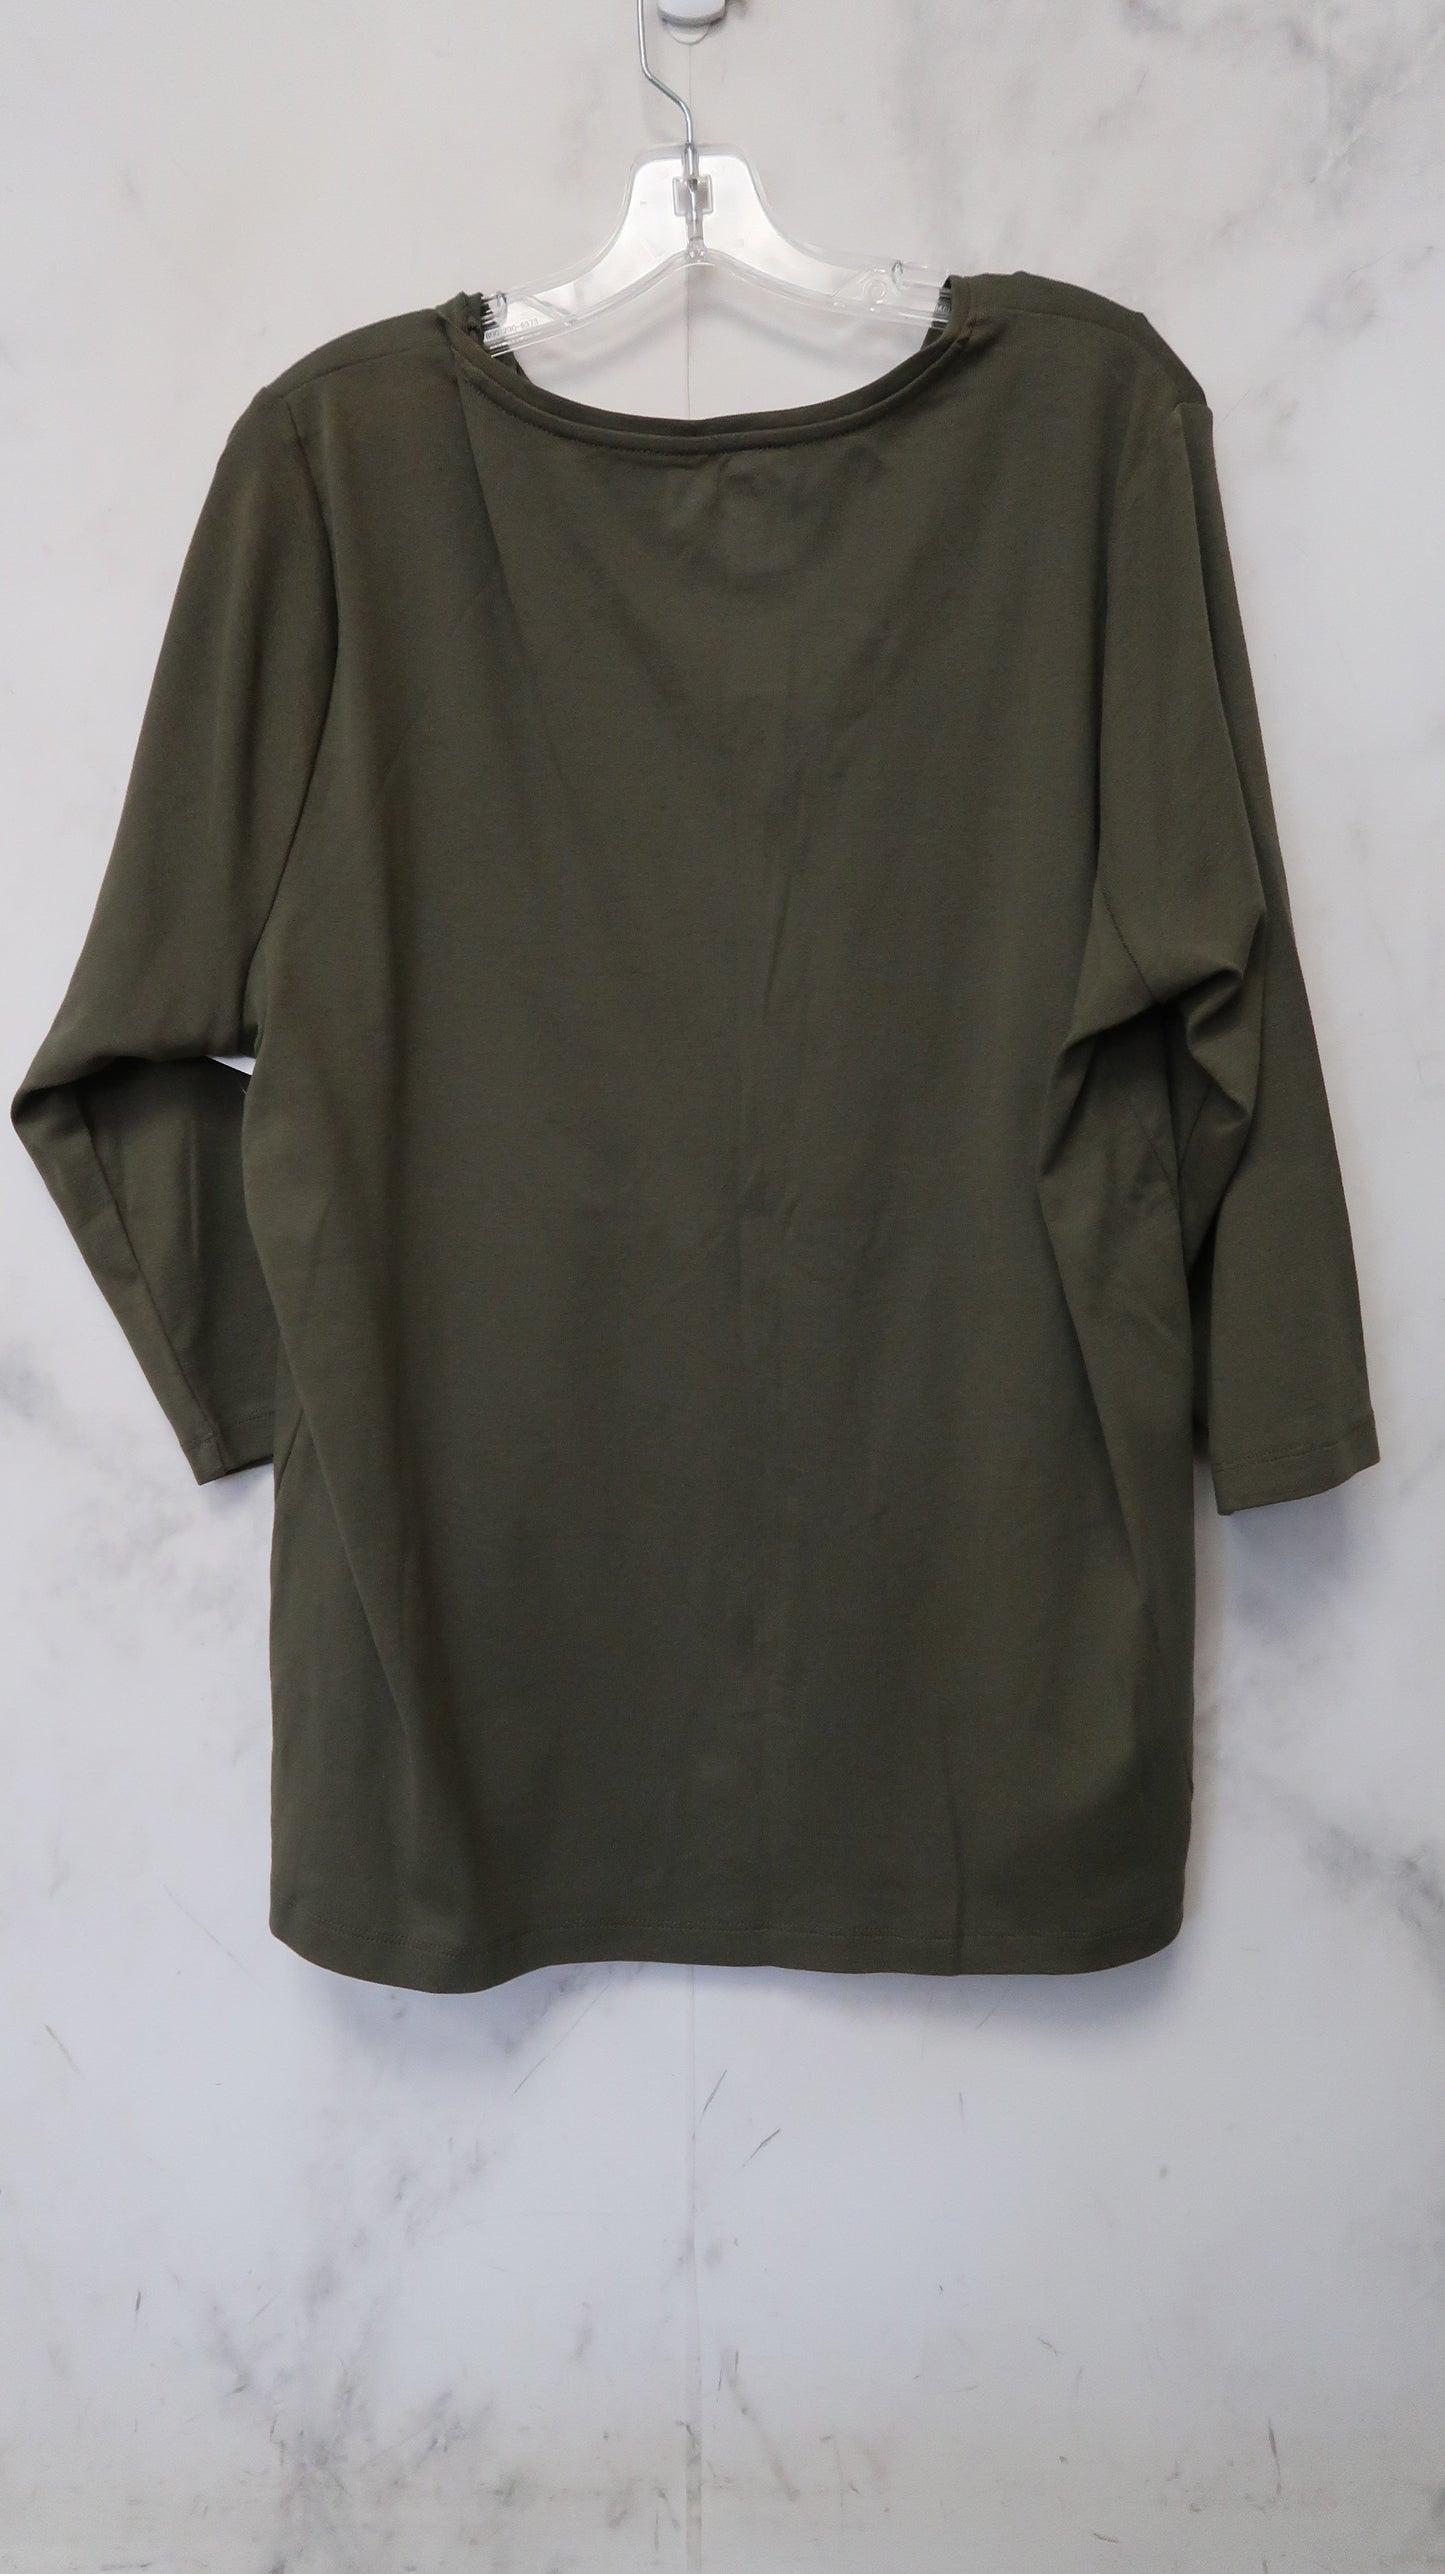 Top Long Sleeve Basic By Cj Banks  Size: 2